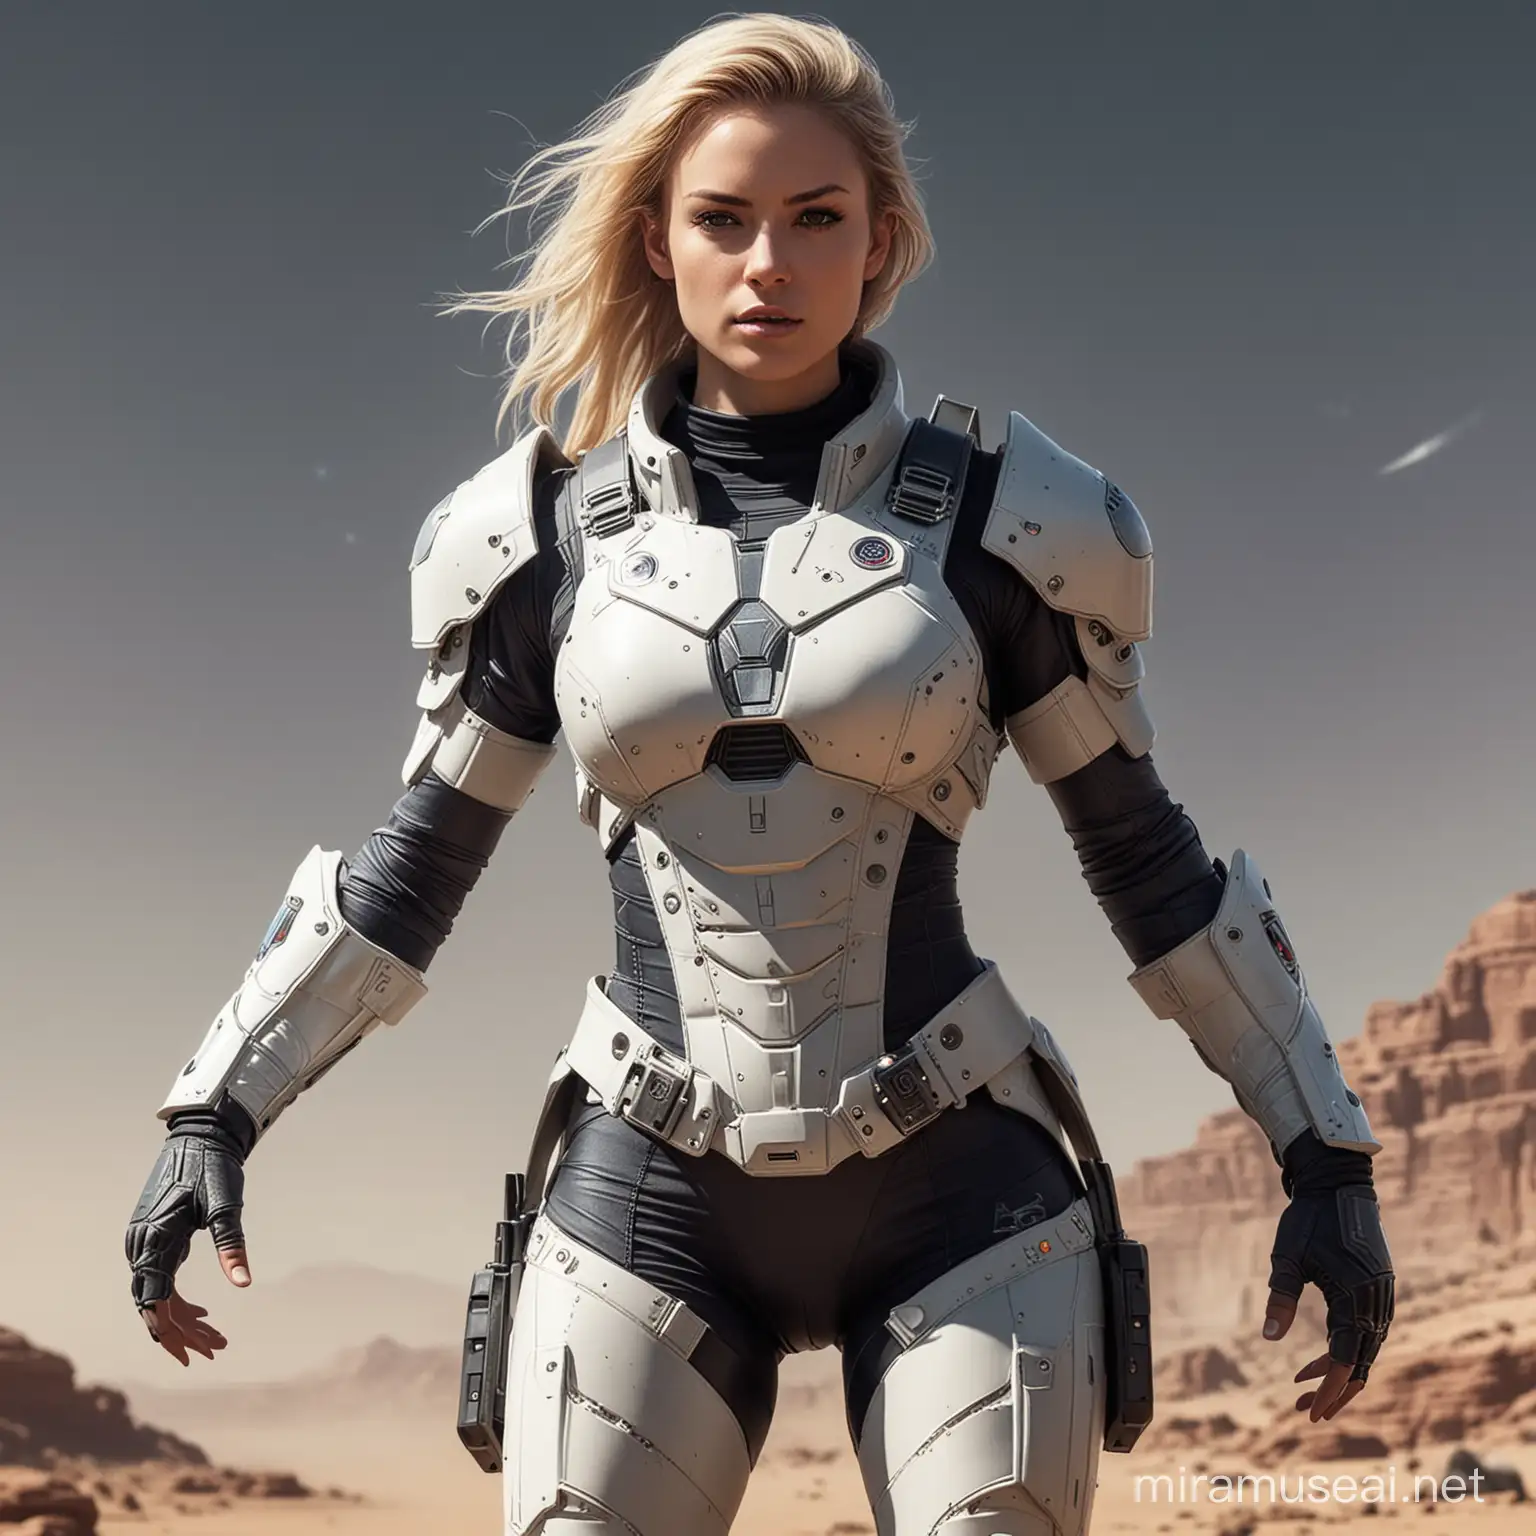 female space ranger in battle with very light armor and tight clothing, full body